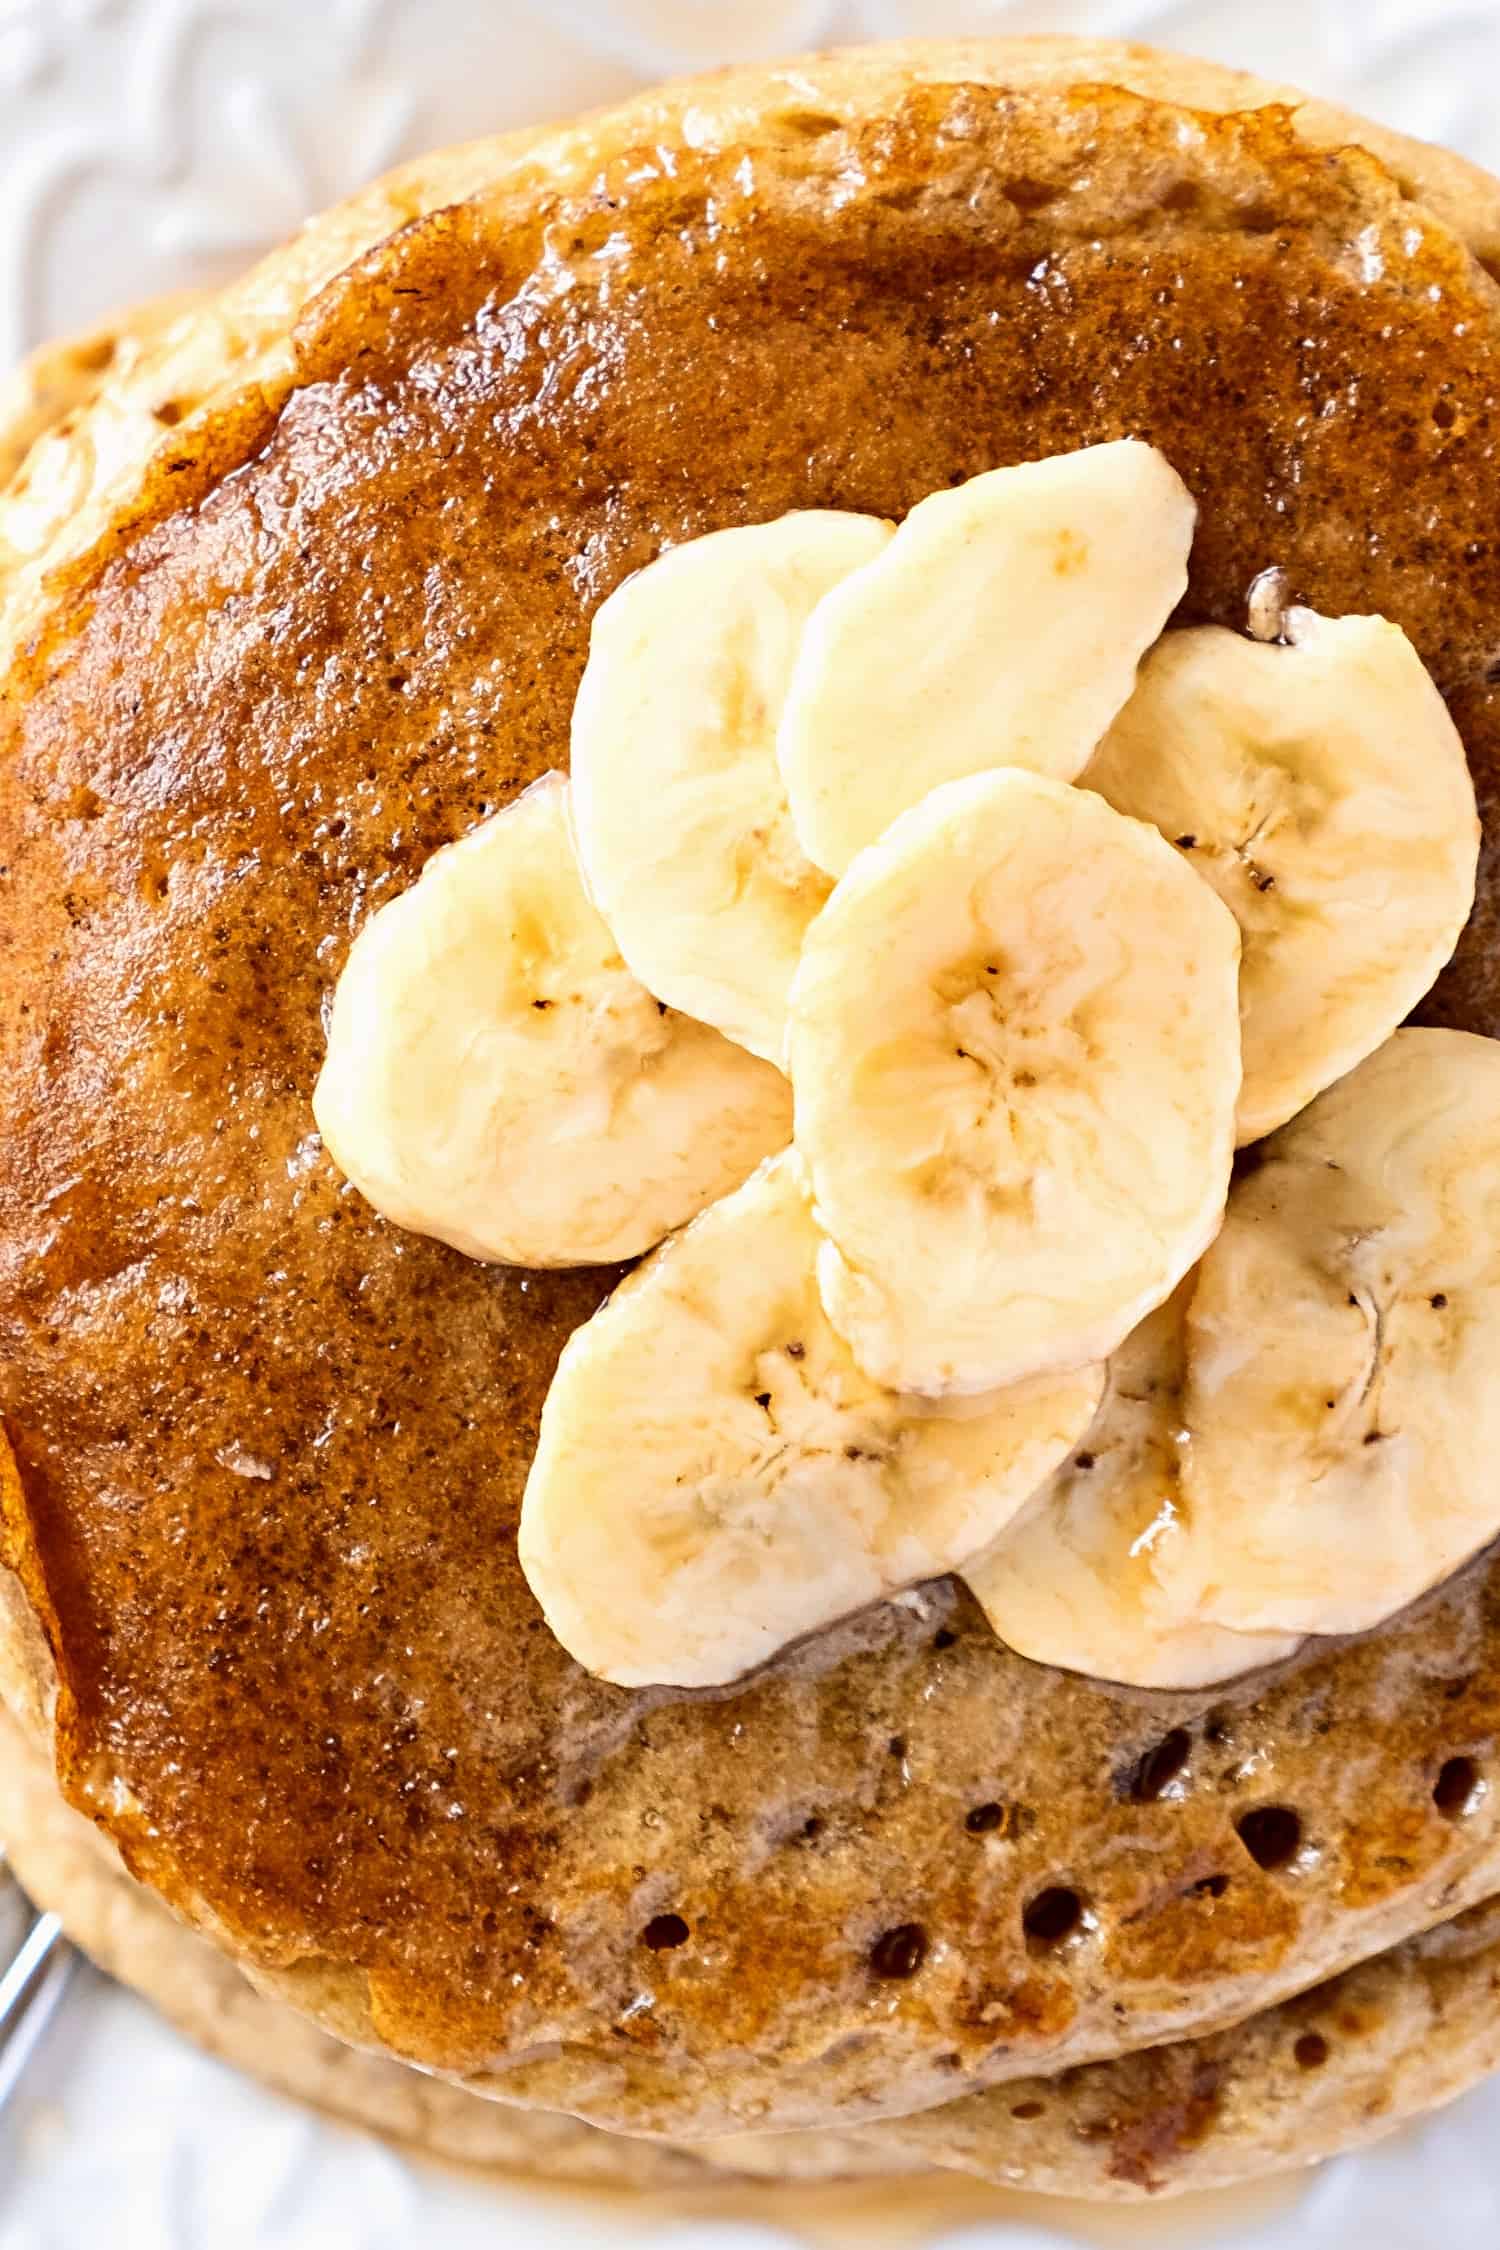 Top down view of sliced bananas on top of dairy-free banana pancakes.